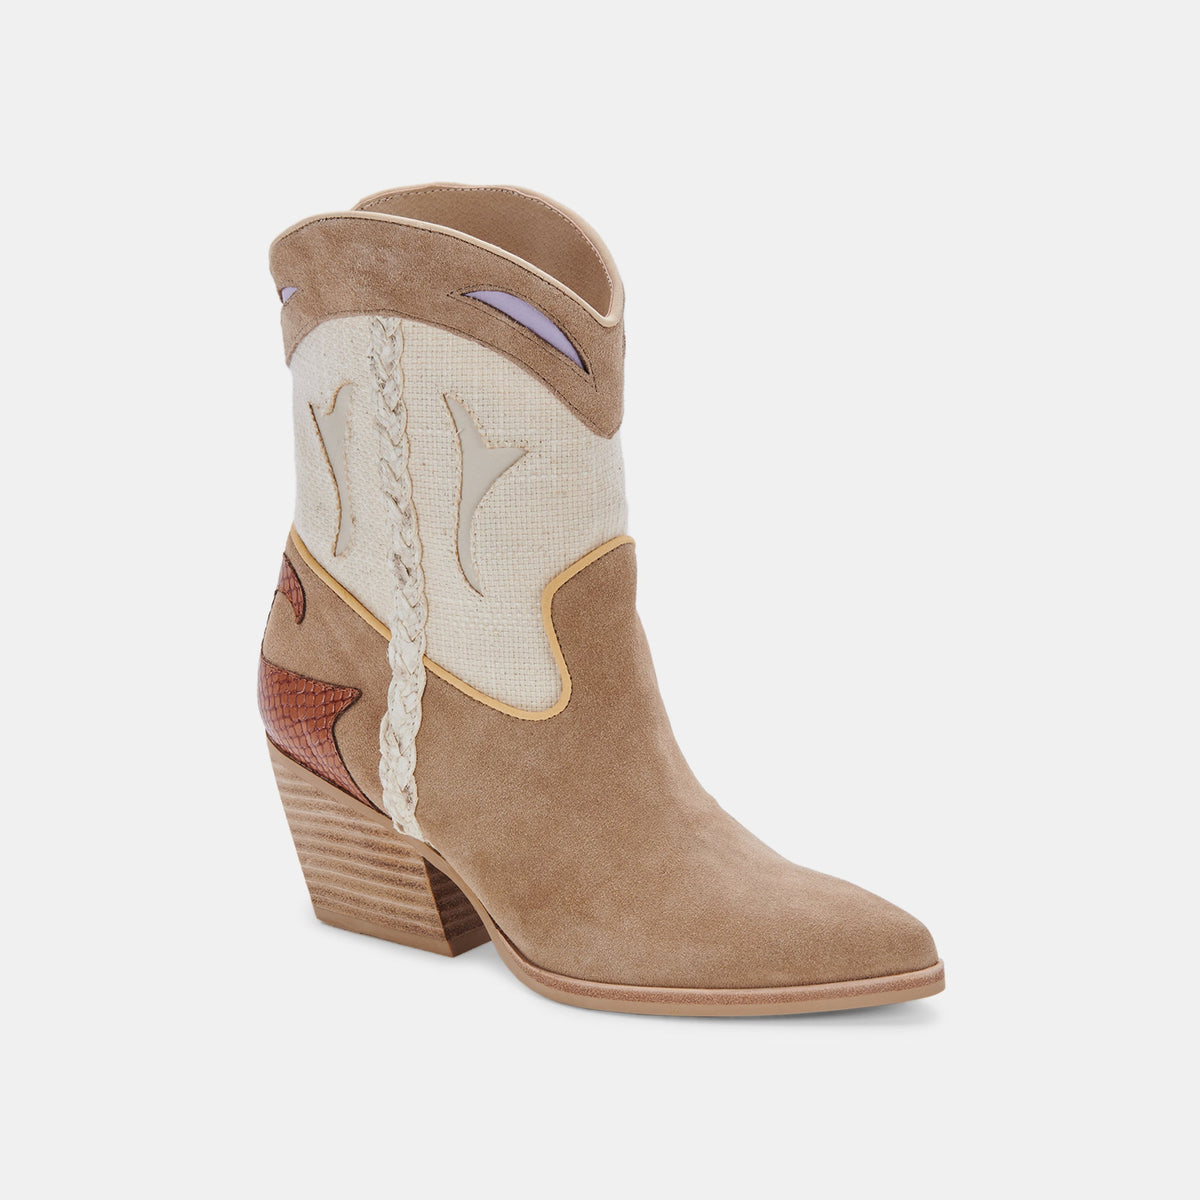 LORAL Booties Taupe Multi Suede | Taupe Suede Western Boots – Dolce Vita